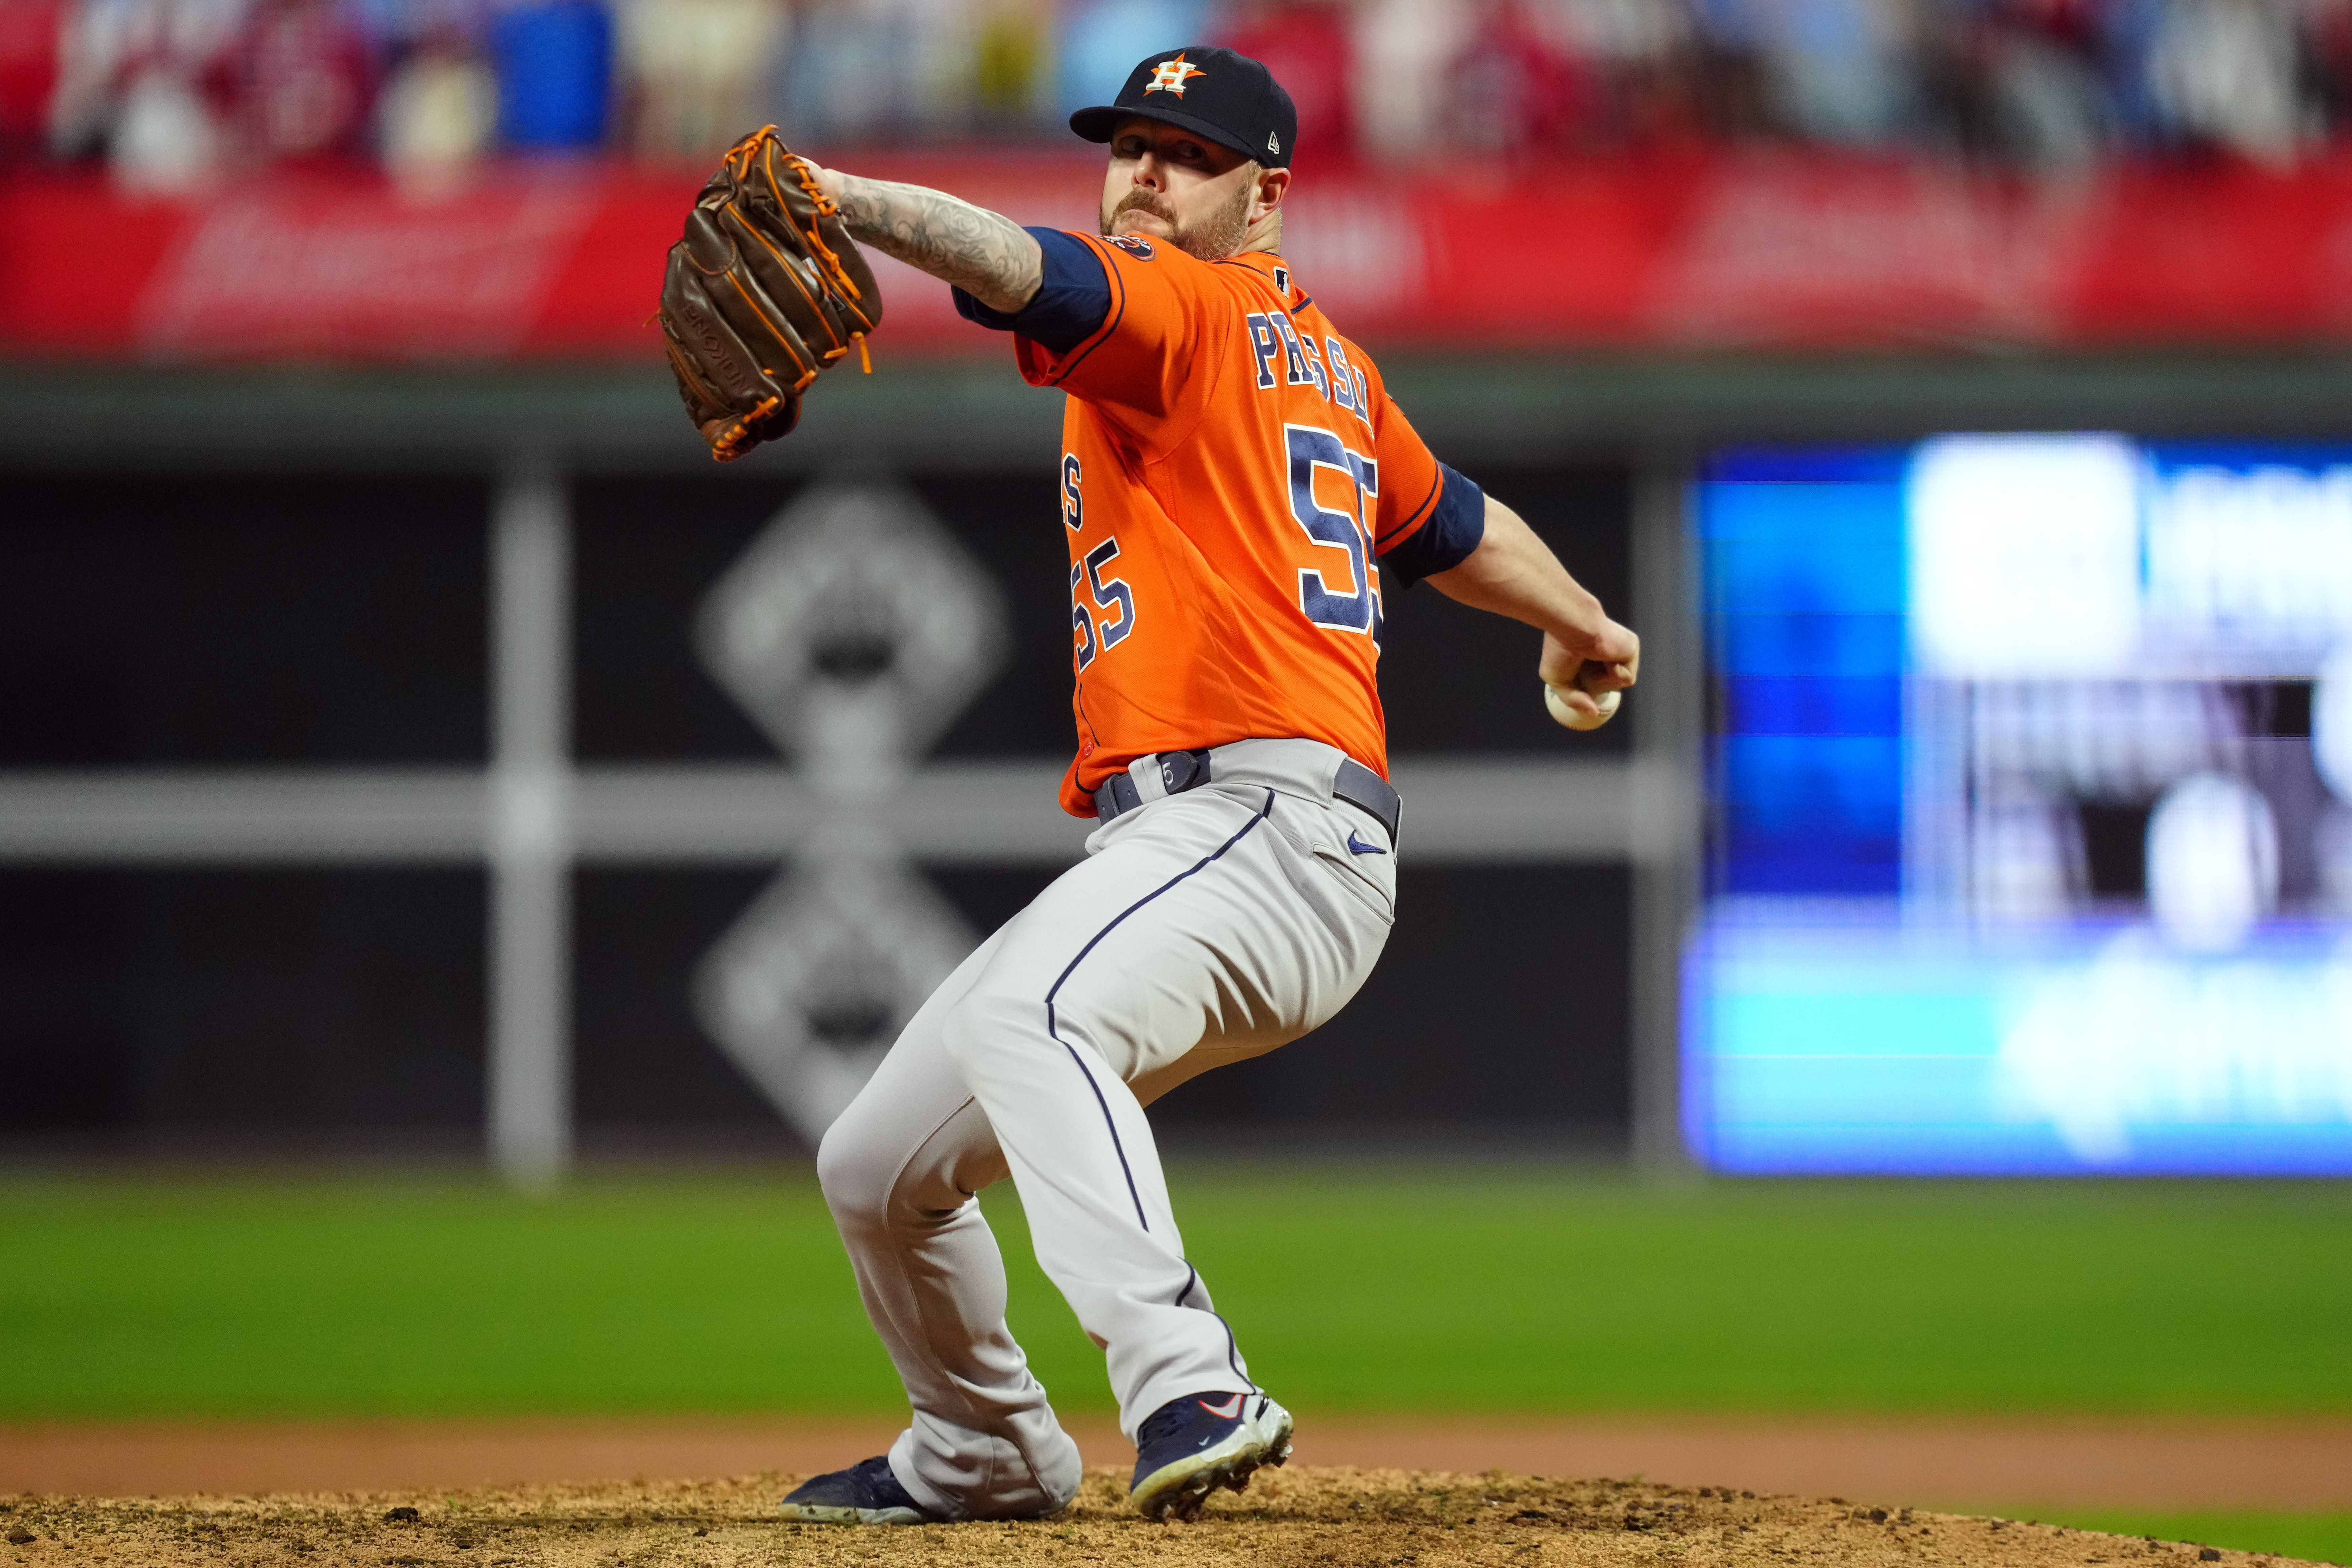 Pitcher Ryan Pressly of the Houston Astros pitches during the eighth inning in Game 5 of the MLB World Series against the Philadelphia Phillies at Citizens Bank Park in Philadelphia, Pennsylvania, November 3, 2022. /CFP